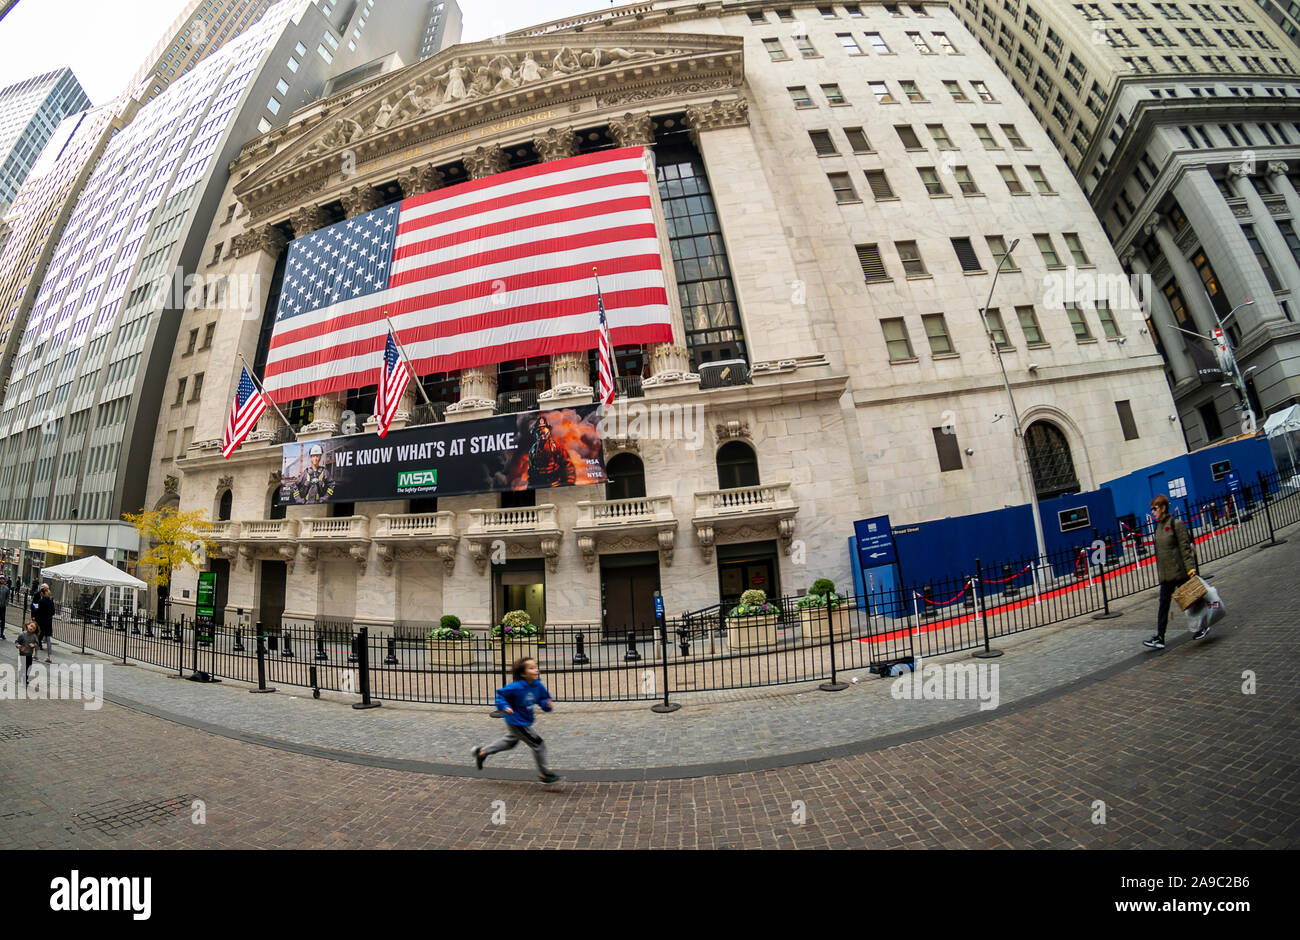 A giant American flag is unfurled across the facade of the New York Stock Exchange to commemorate Veterans Day in New York on Monday, November 11, 2019. Originally knows as Armistice Day, the holiday memorializes that on the eleventh hour of the eleventh day of the eleventh month the guns fell silent in1918 marking the end of World War I.  The holiday has since been expanded to include all American soldiers from all wars.(© Richard B. Levine) Stock Photo